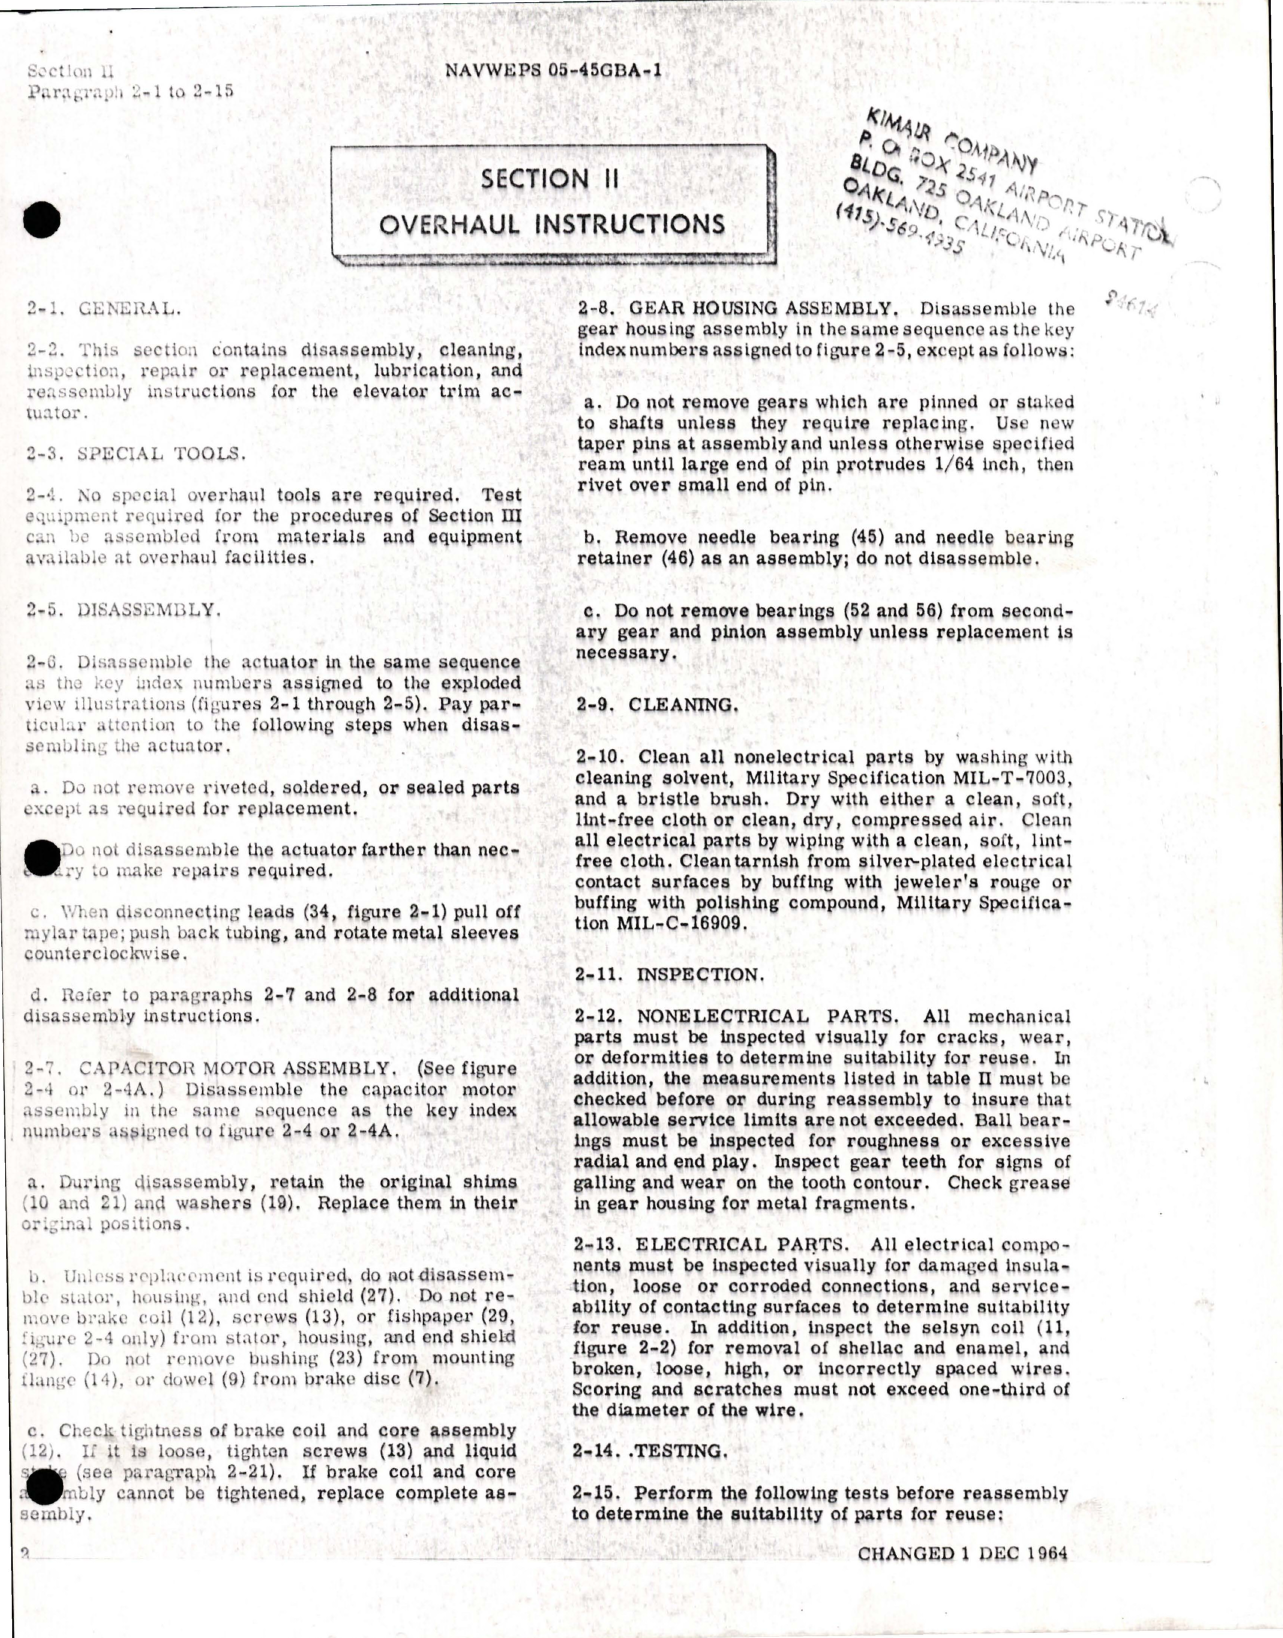 Sample page 5 from AirCorps Library document: Overhaul Instructions for Elevator Trim Actuator - MG71B1